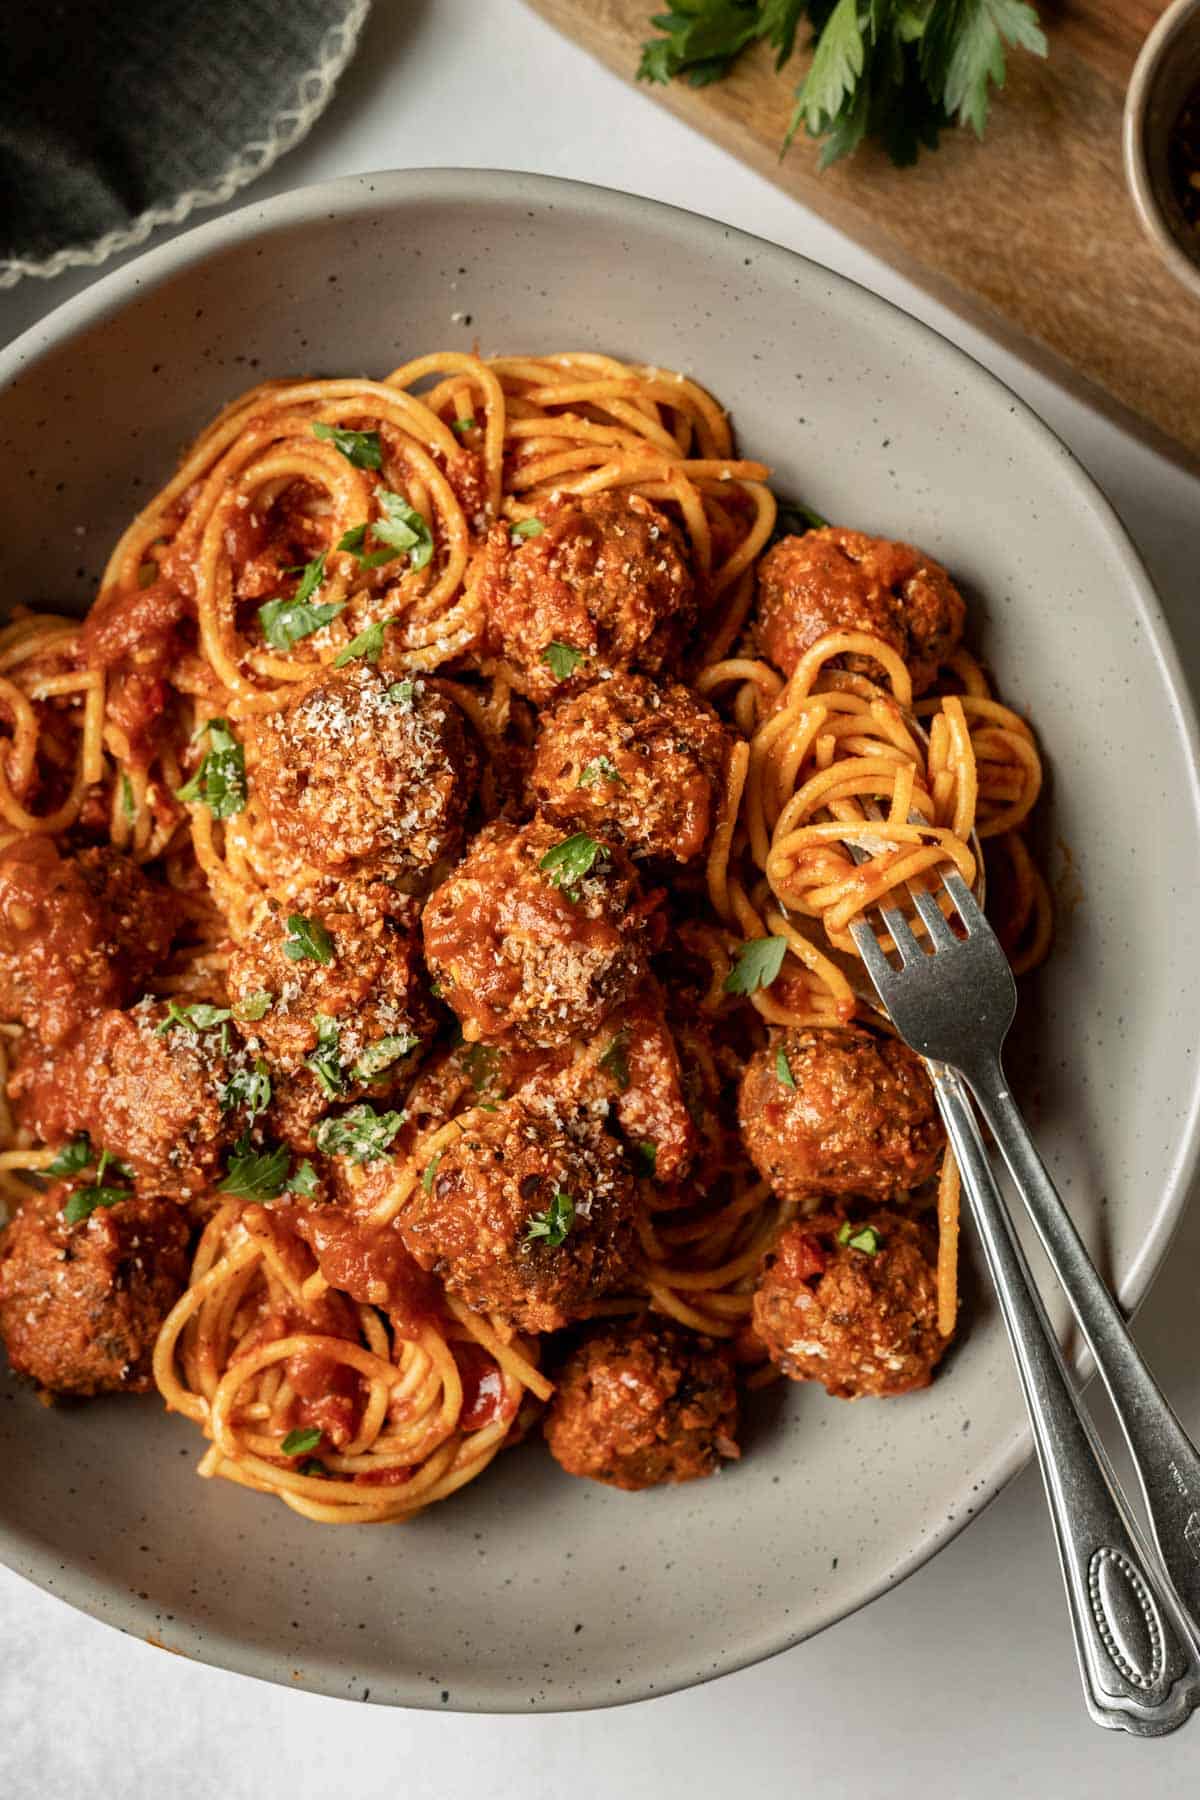 large gray serving bowl filled with spaghetti, sauce, and vegan meatballs.